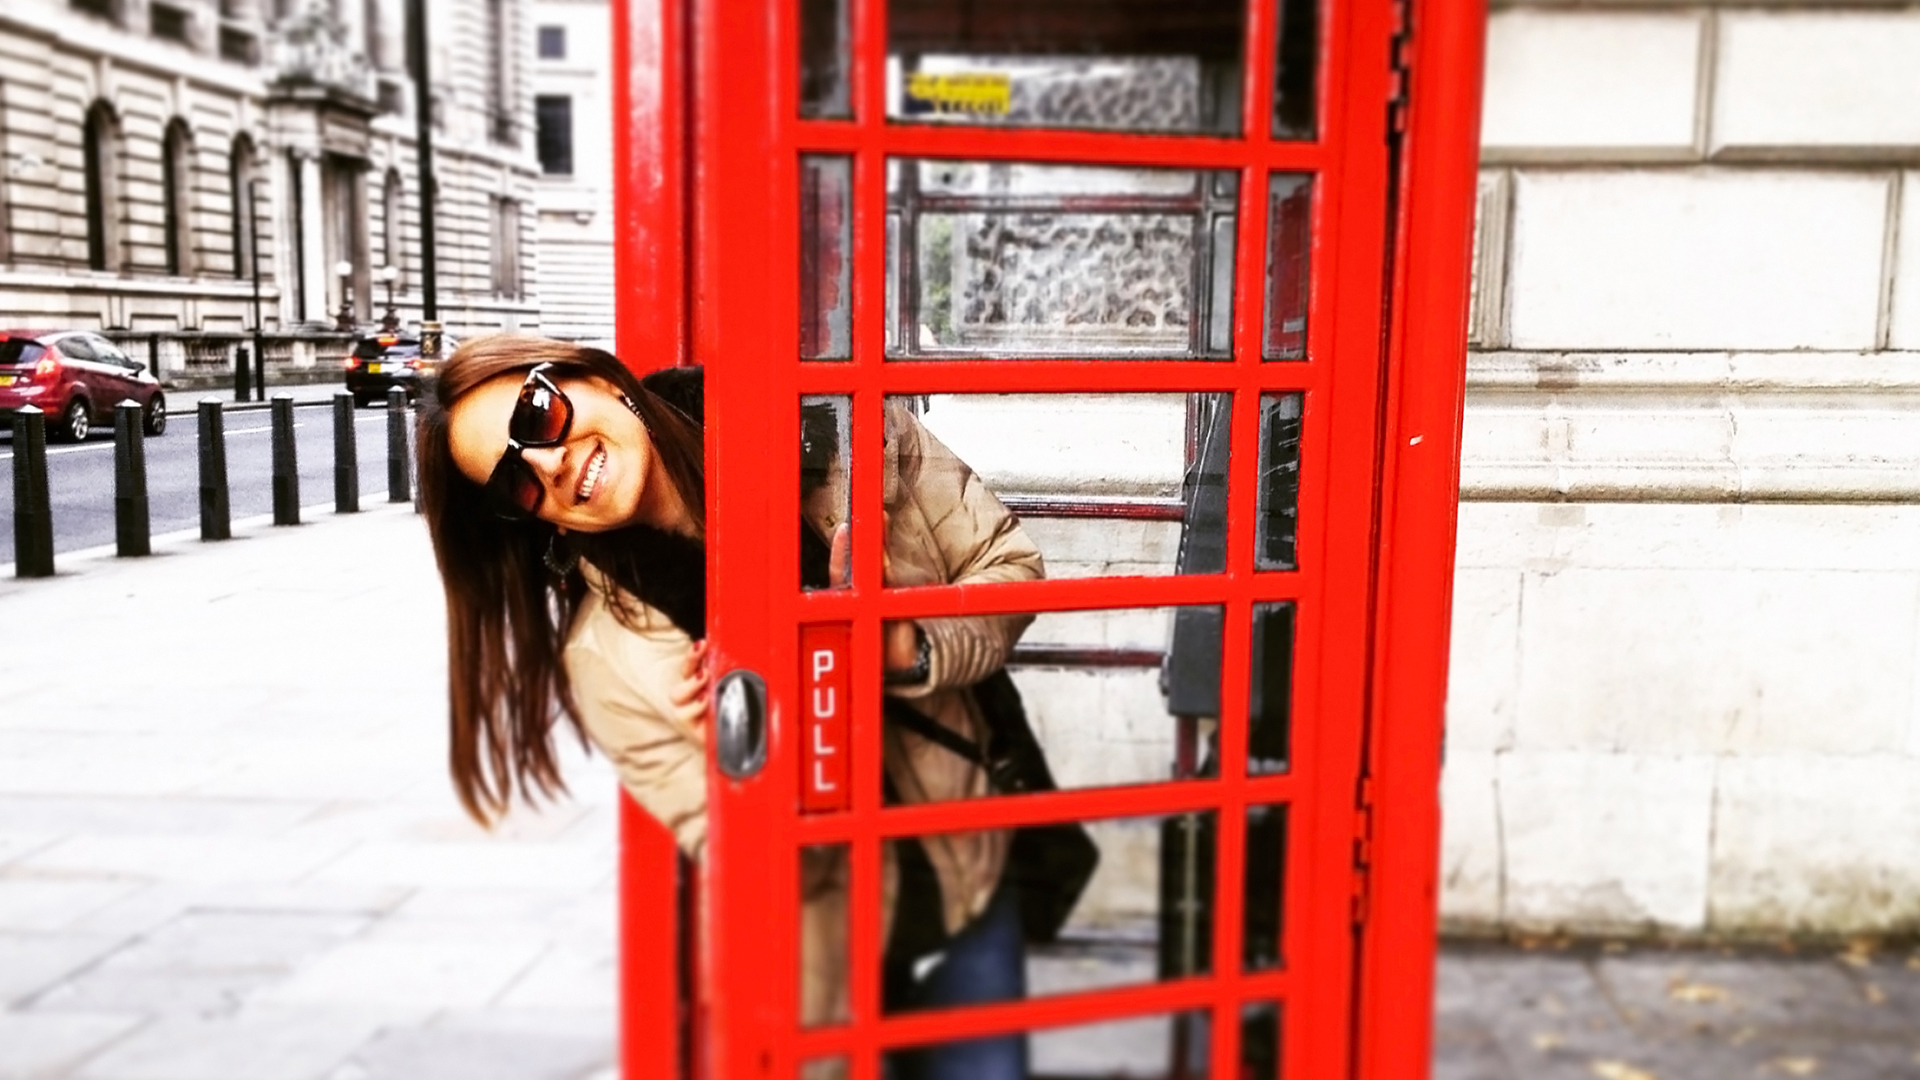 Lady in a London phone booth